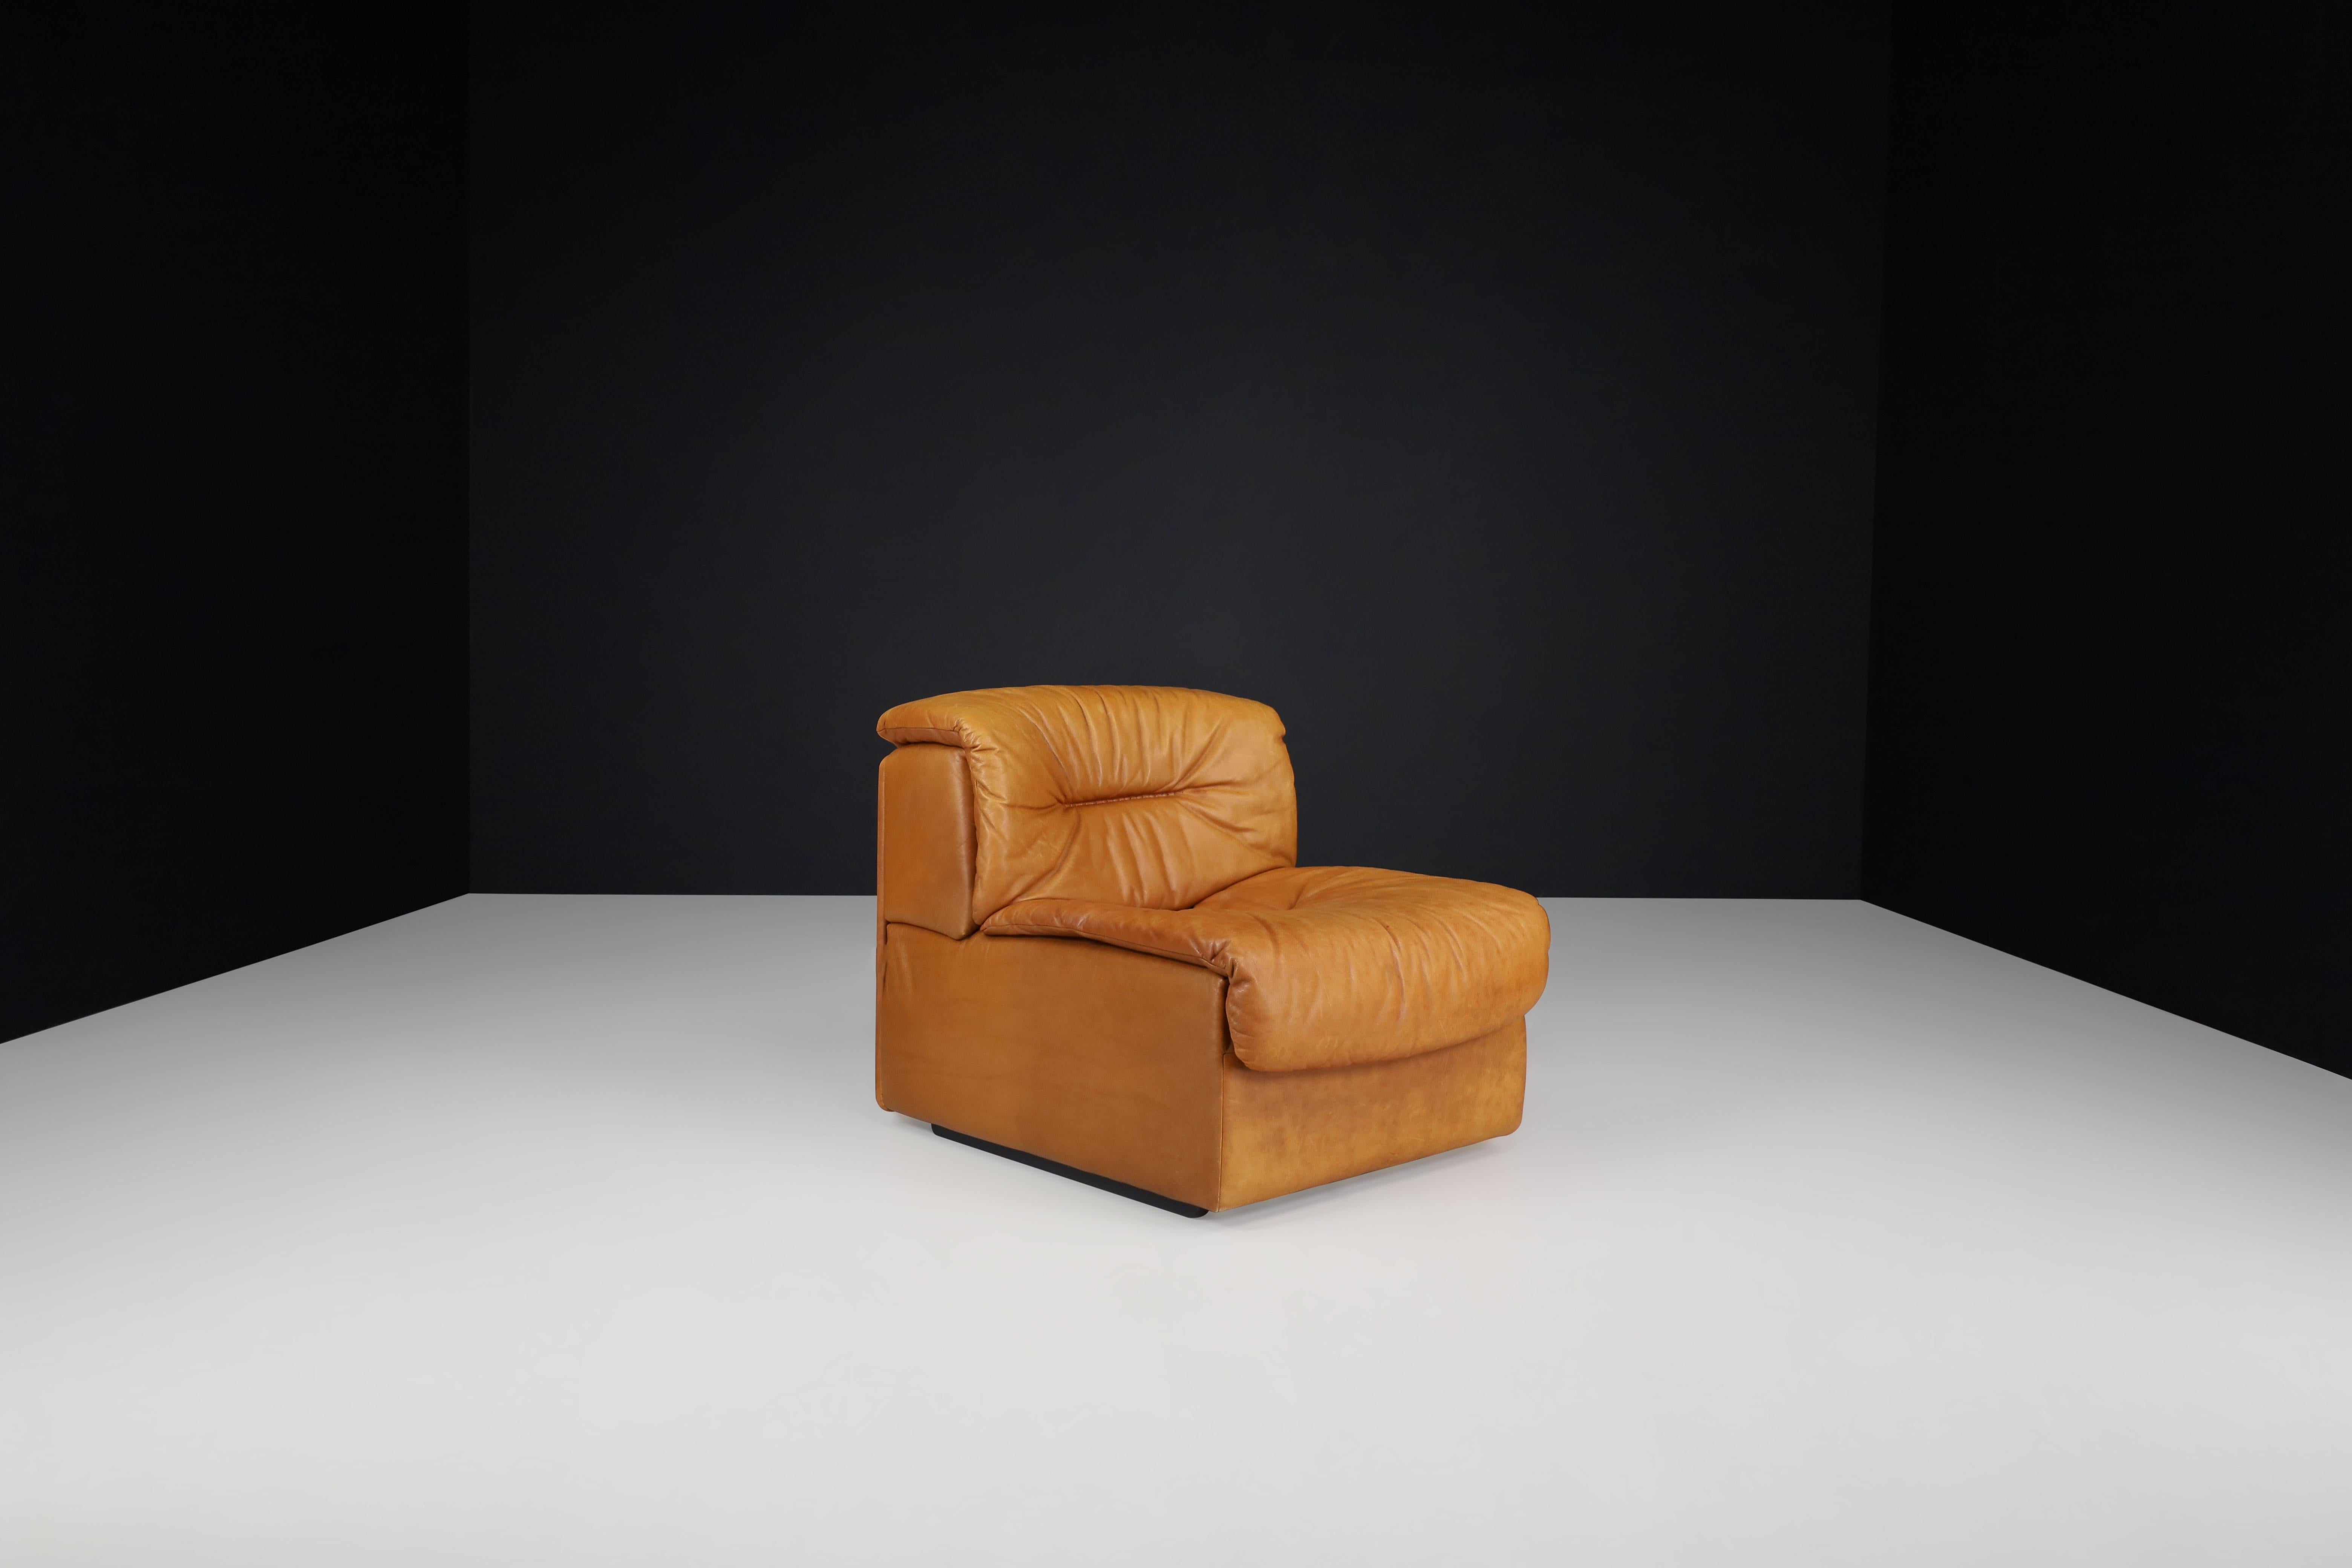 De Sede DS 14 lounge chair in patinated cognac leather, Switzerland, 1970s 

This robust patinated De Sede lounge chair ensures ultimate comfort and building quality with its solid wooden frame and thick hand-stitched leather upholstery. Nice